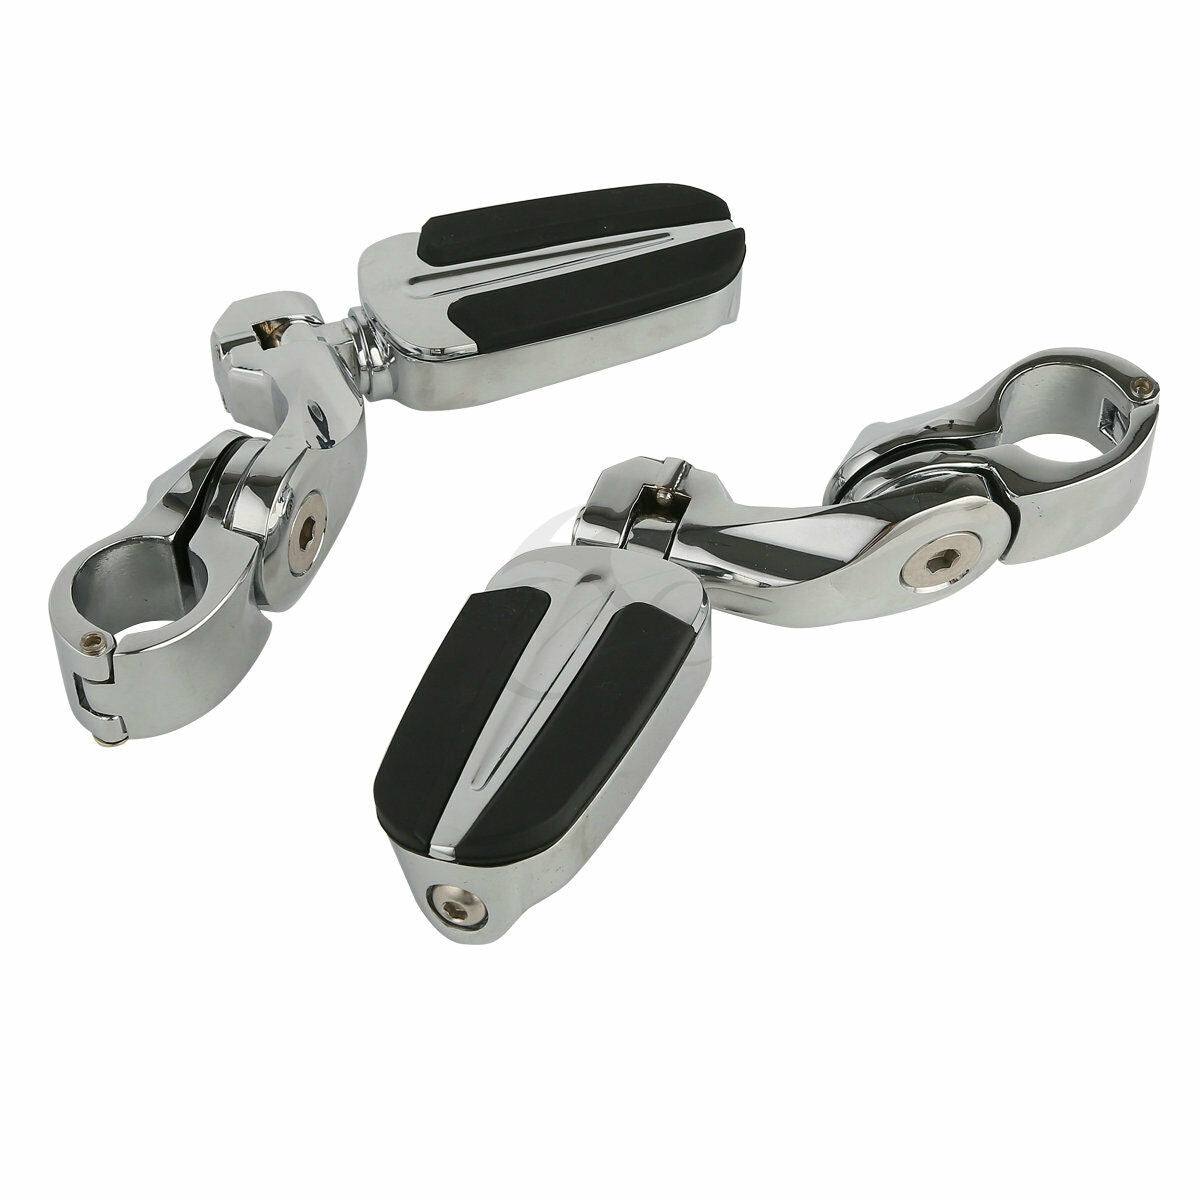 Slipstream Foot Pegs Rests & 1.25" Short Angled Adjustable Mount Fit For Harley - Moto Life Products